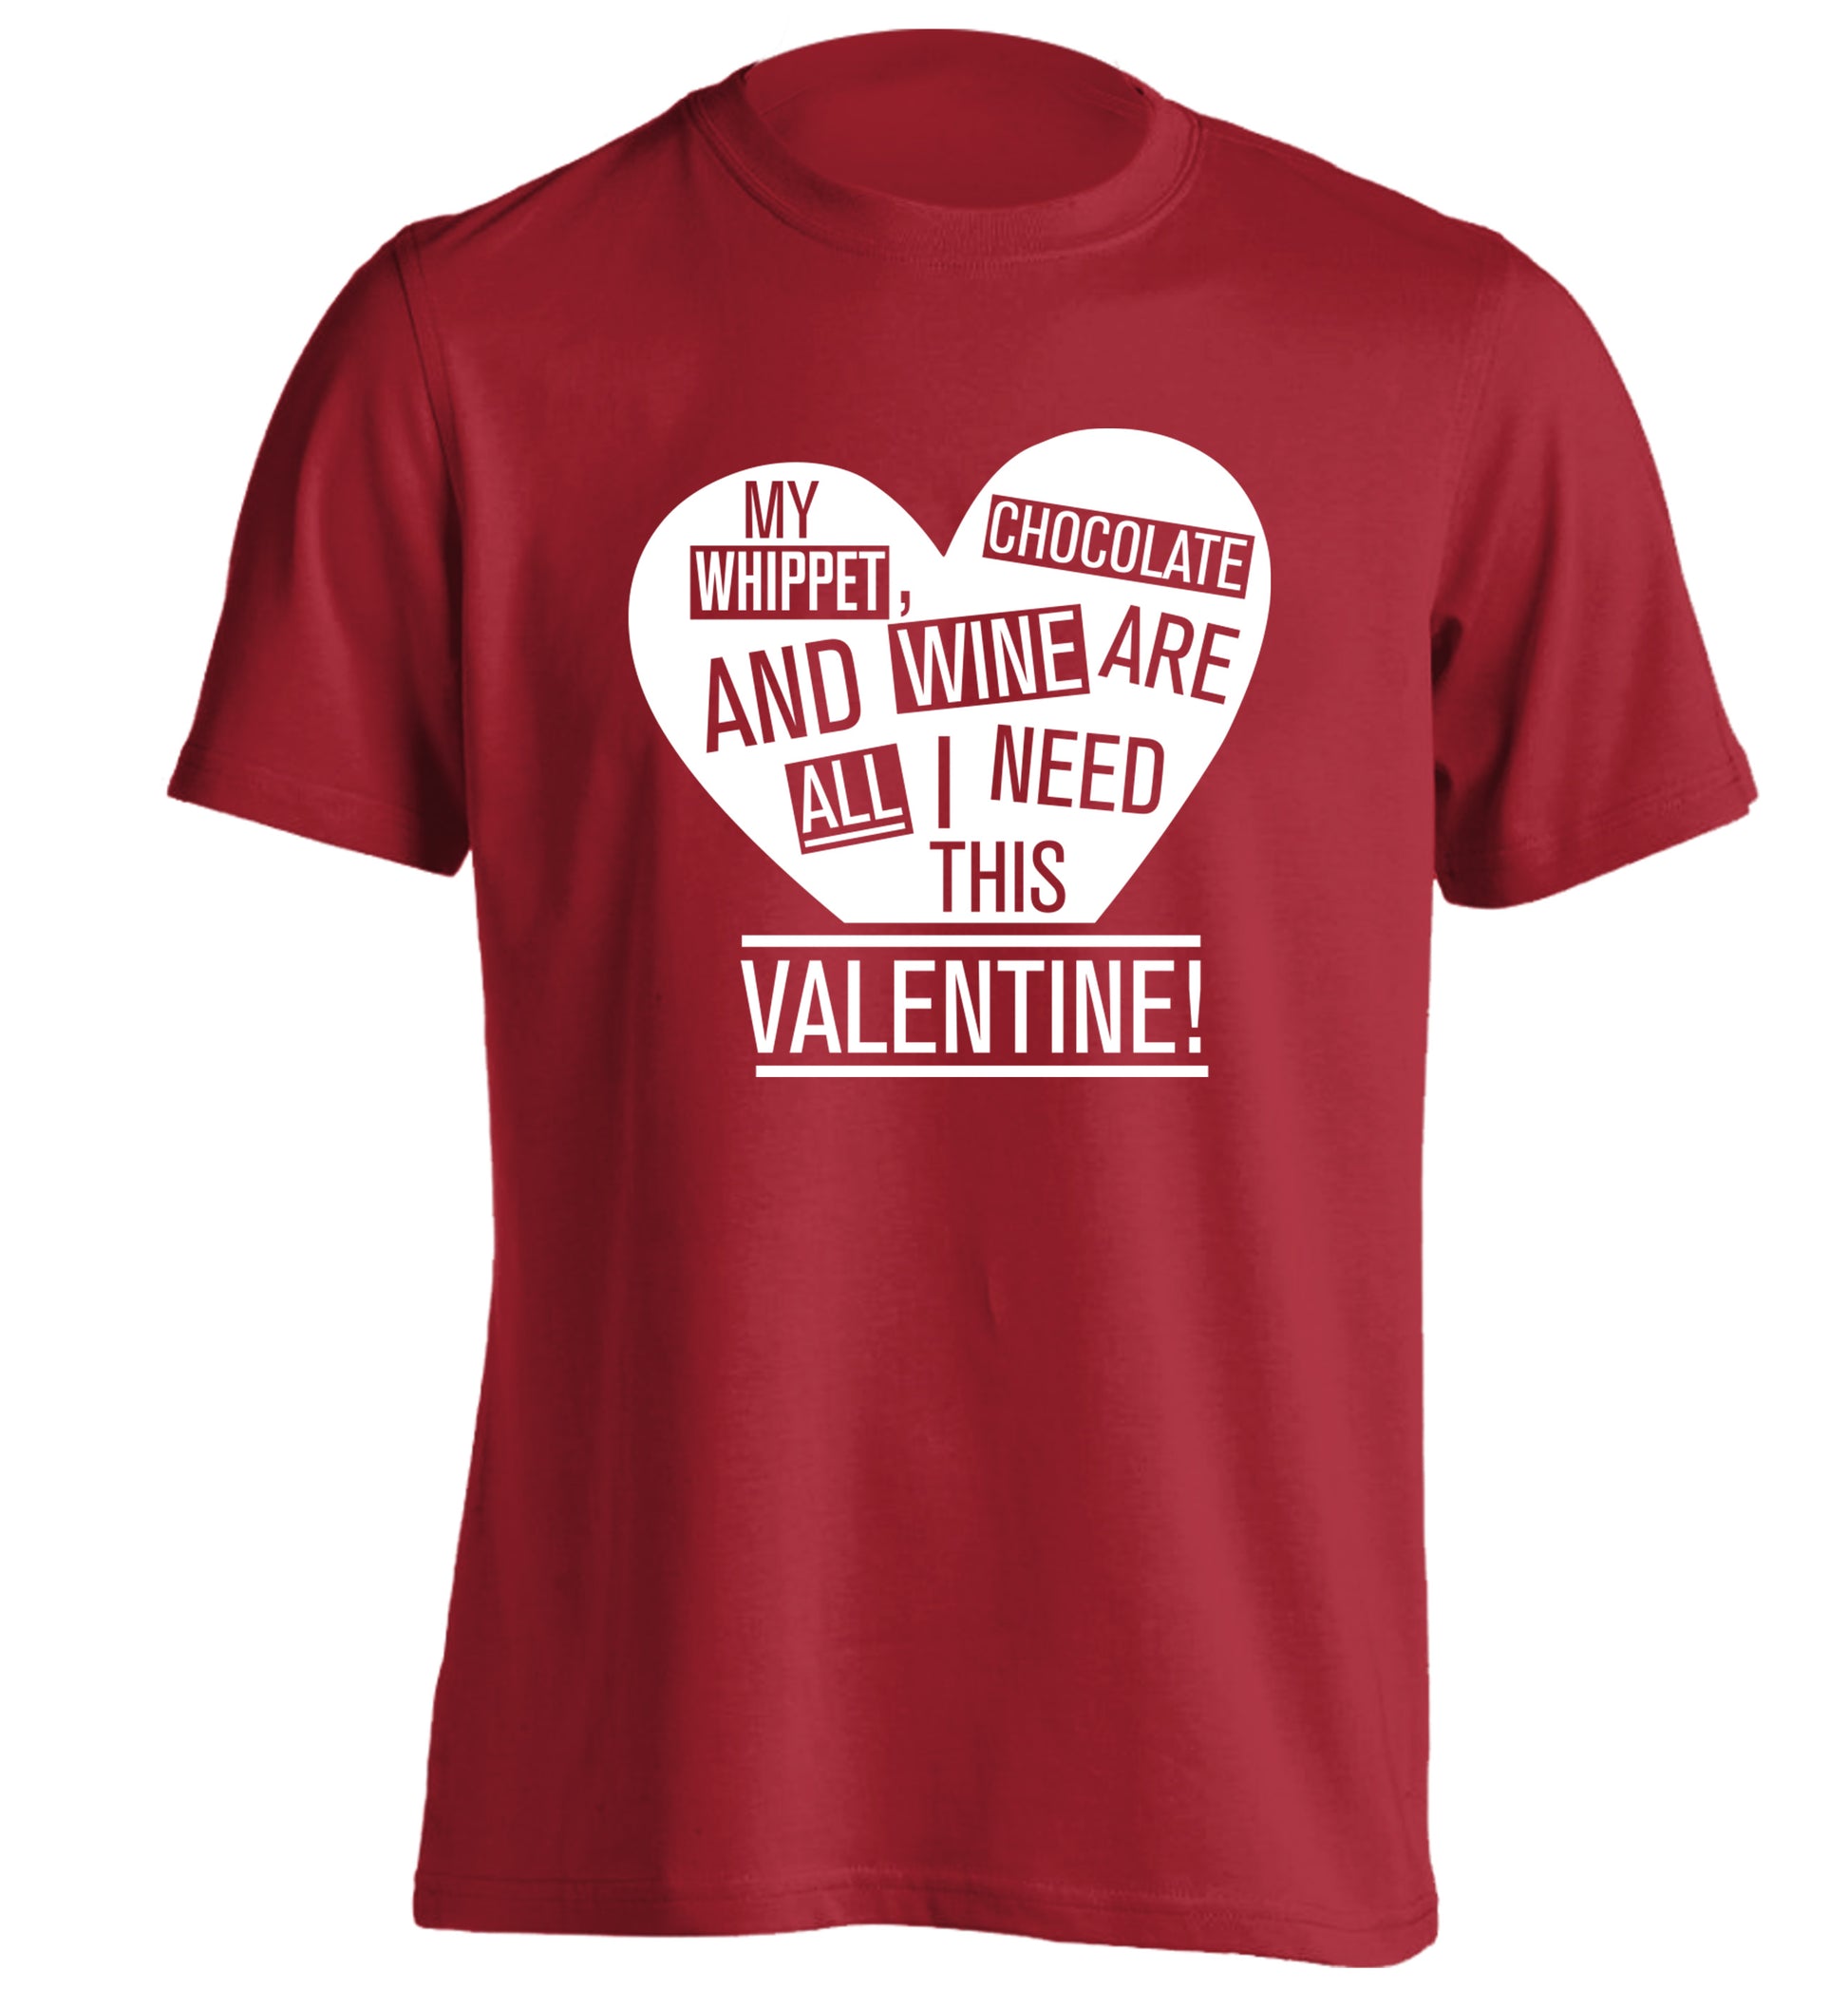 My whippet, chocolate and wine are all I need this valentine! adults unisex red Tshirt 2XL